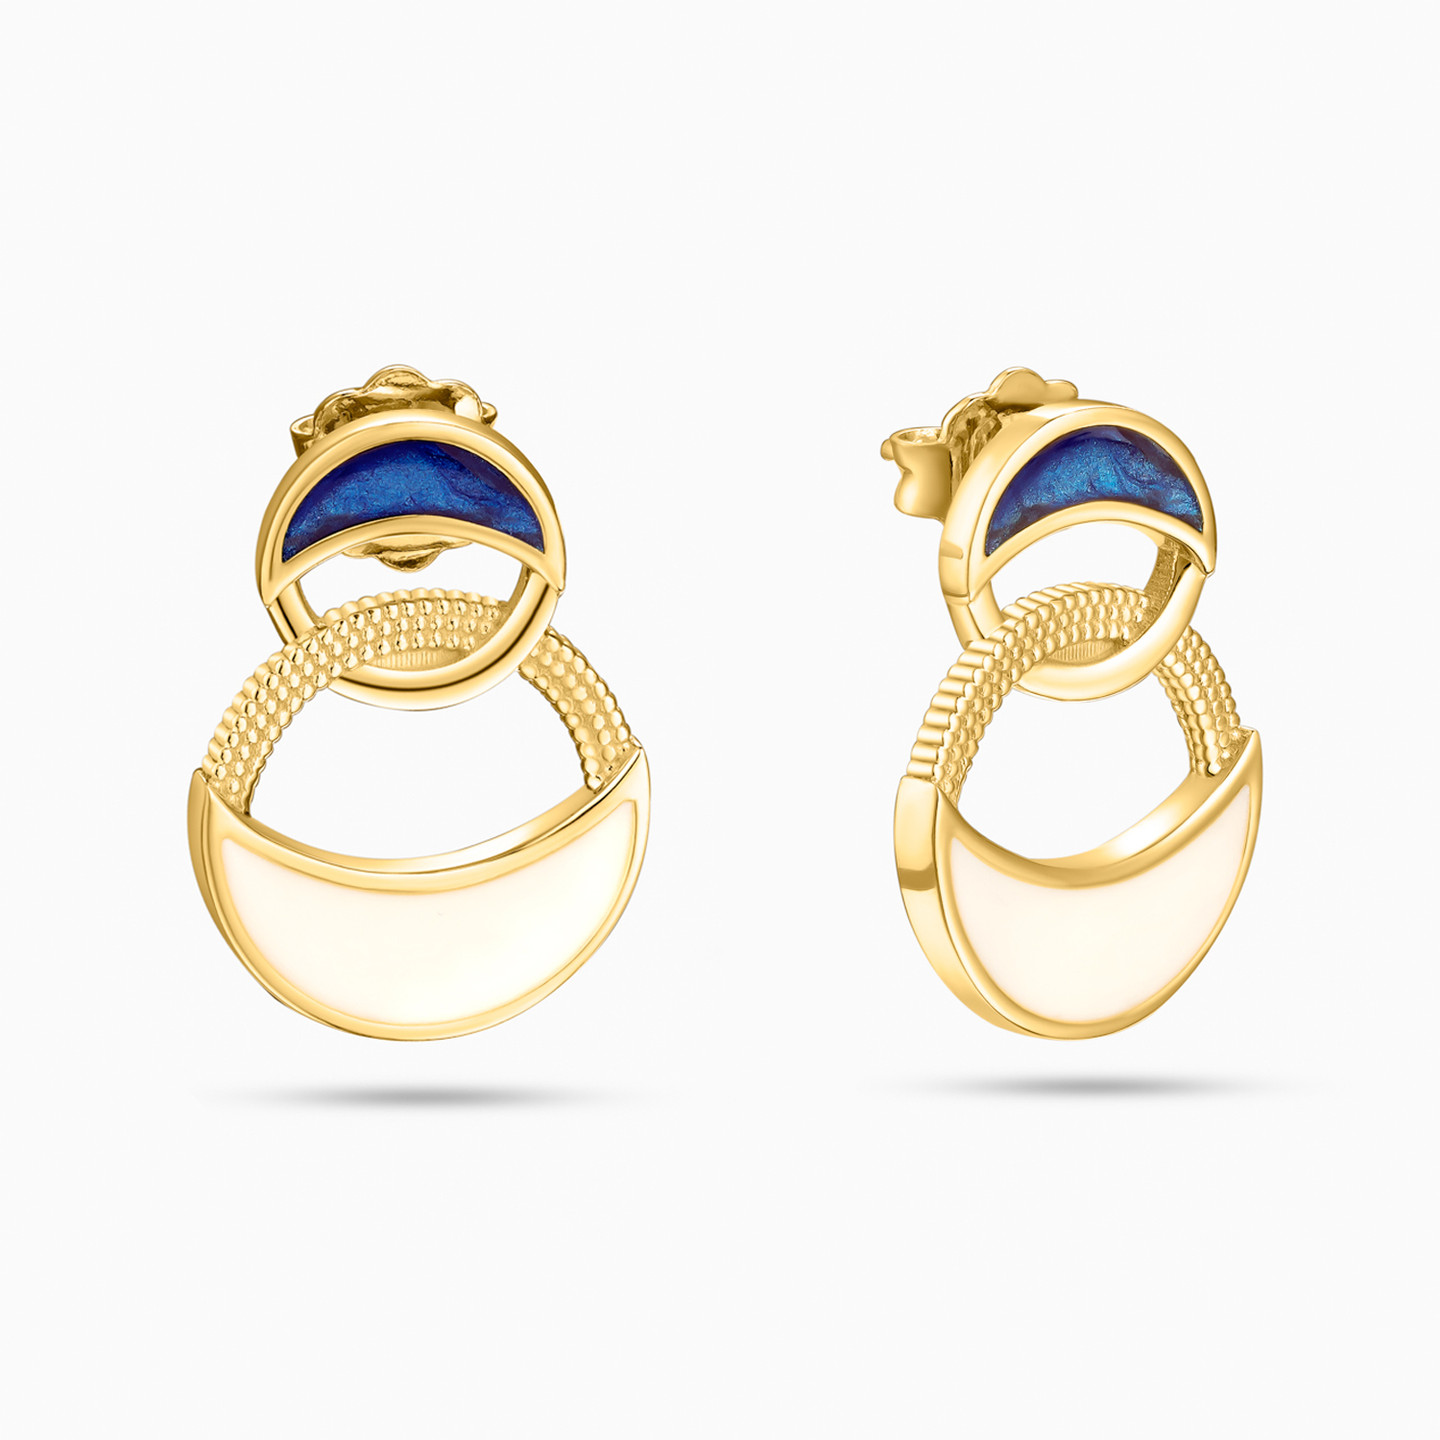 Interlocked Circles Shaped Colored Stones Stud Earrings in 18K Gold - 2